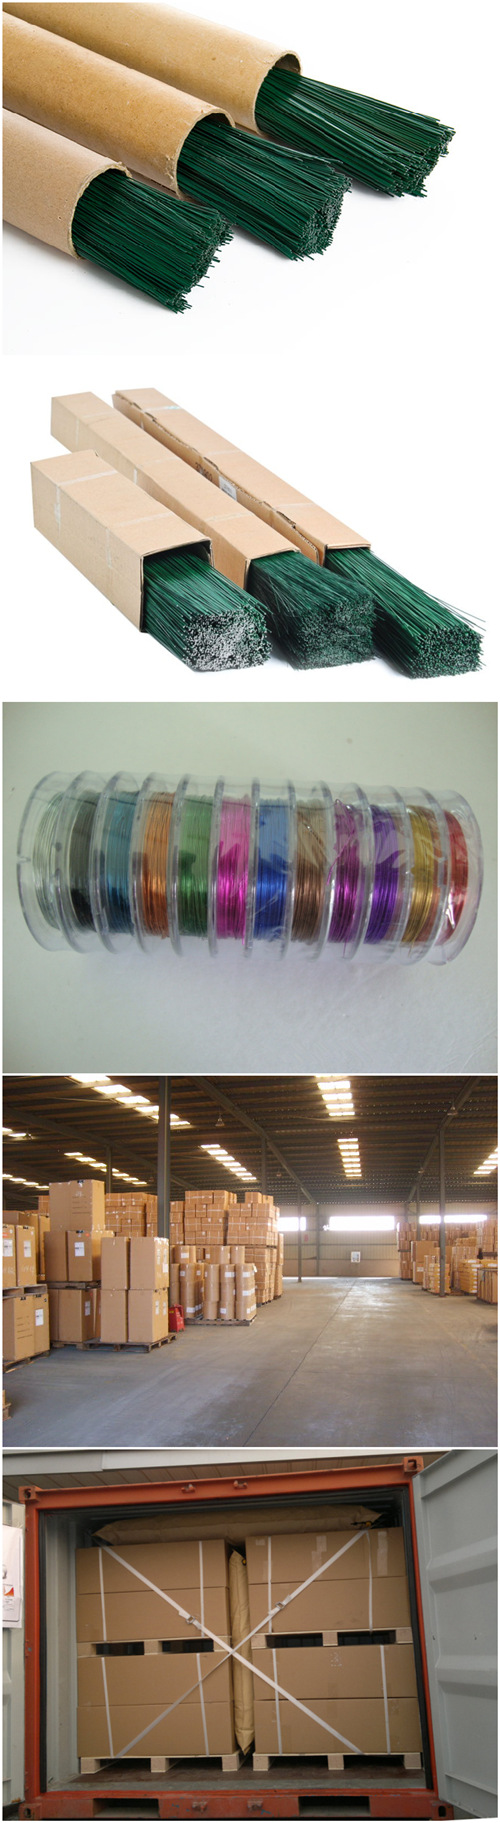 0.4mm Green Craft Wire Made in China